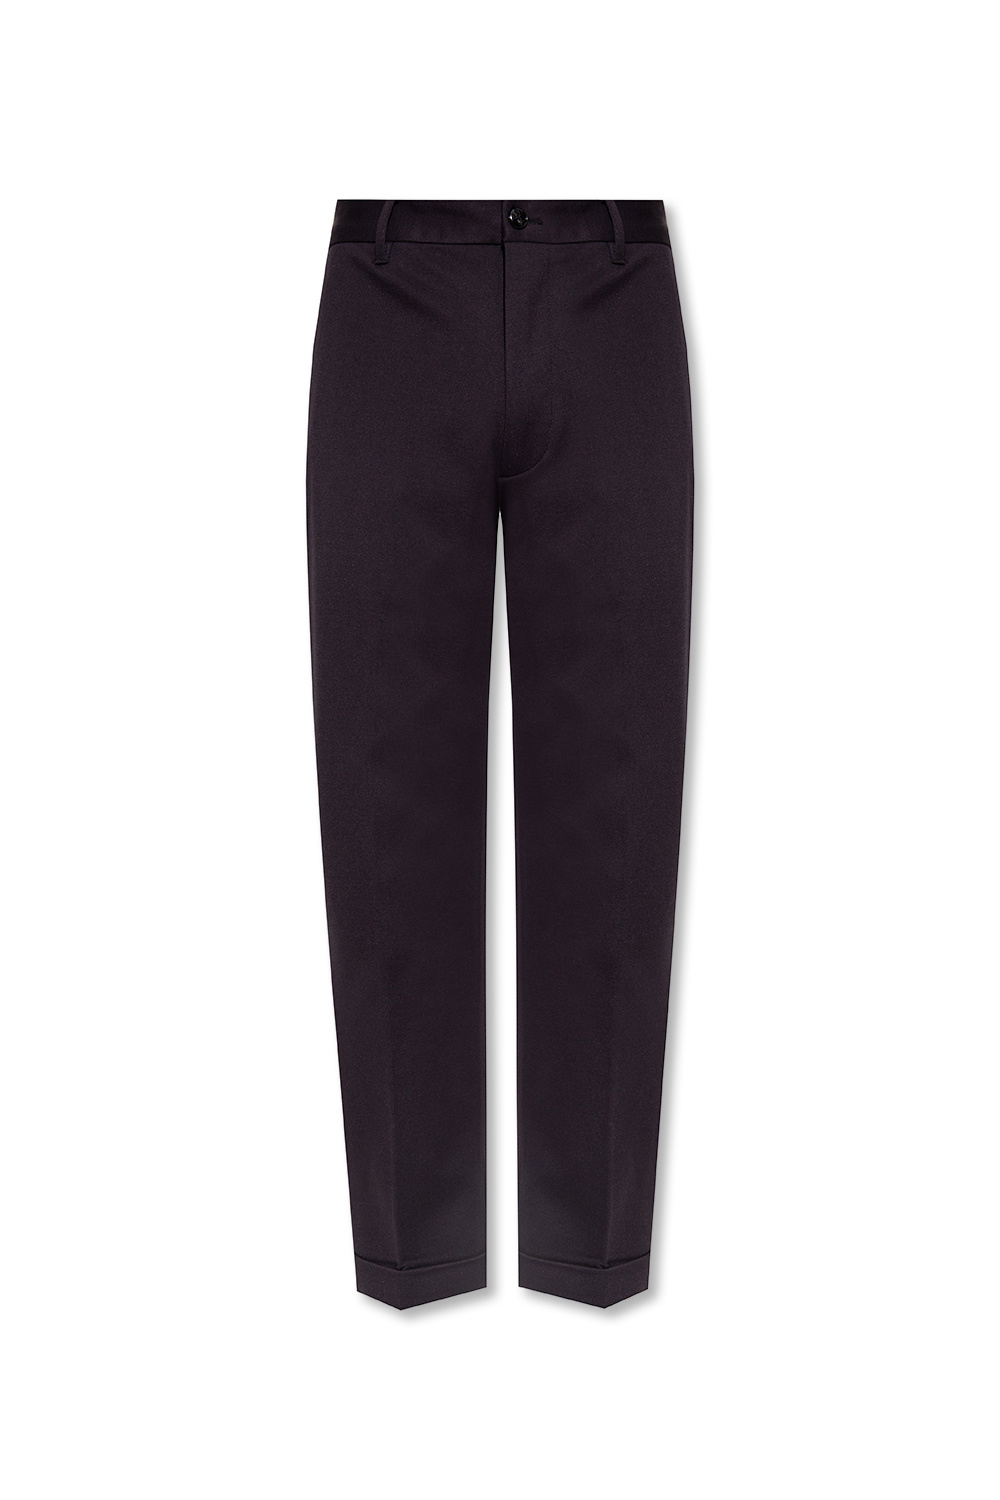 Emporio Armani Trousers with turn-up hems